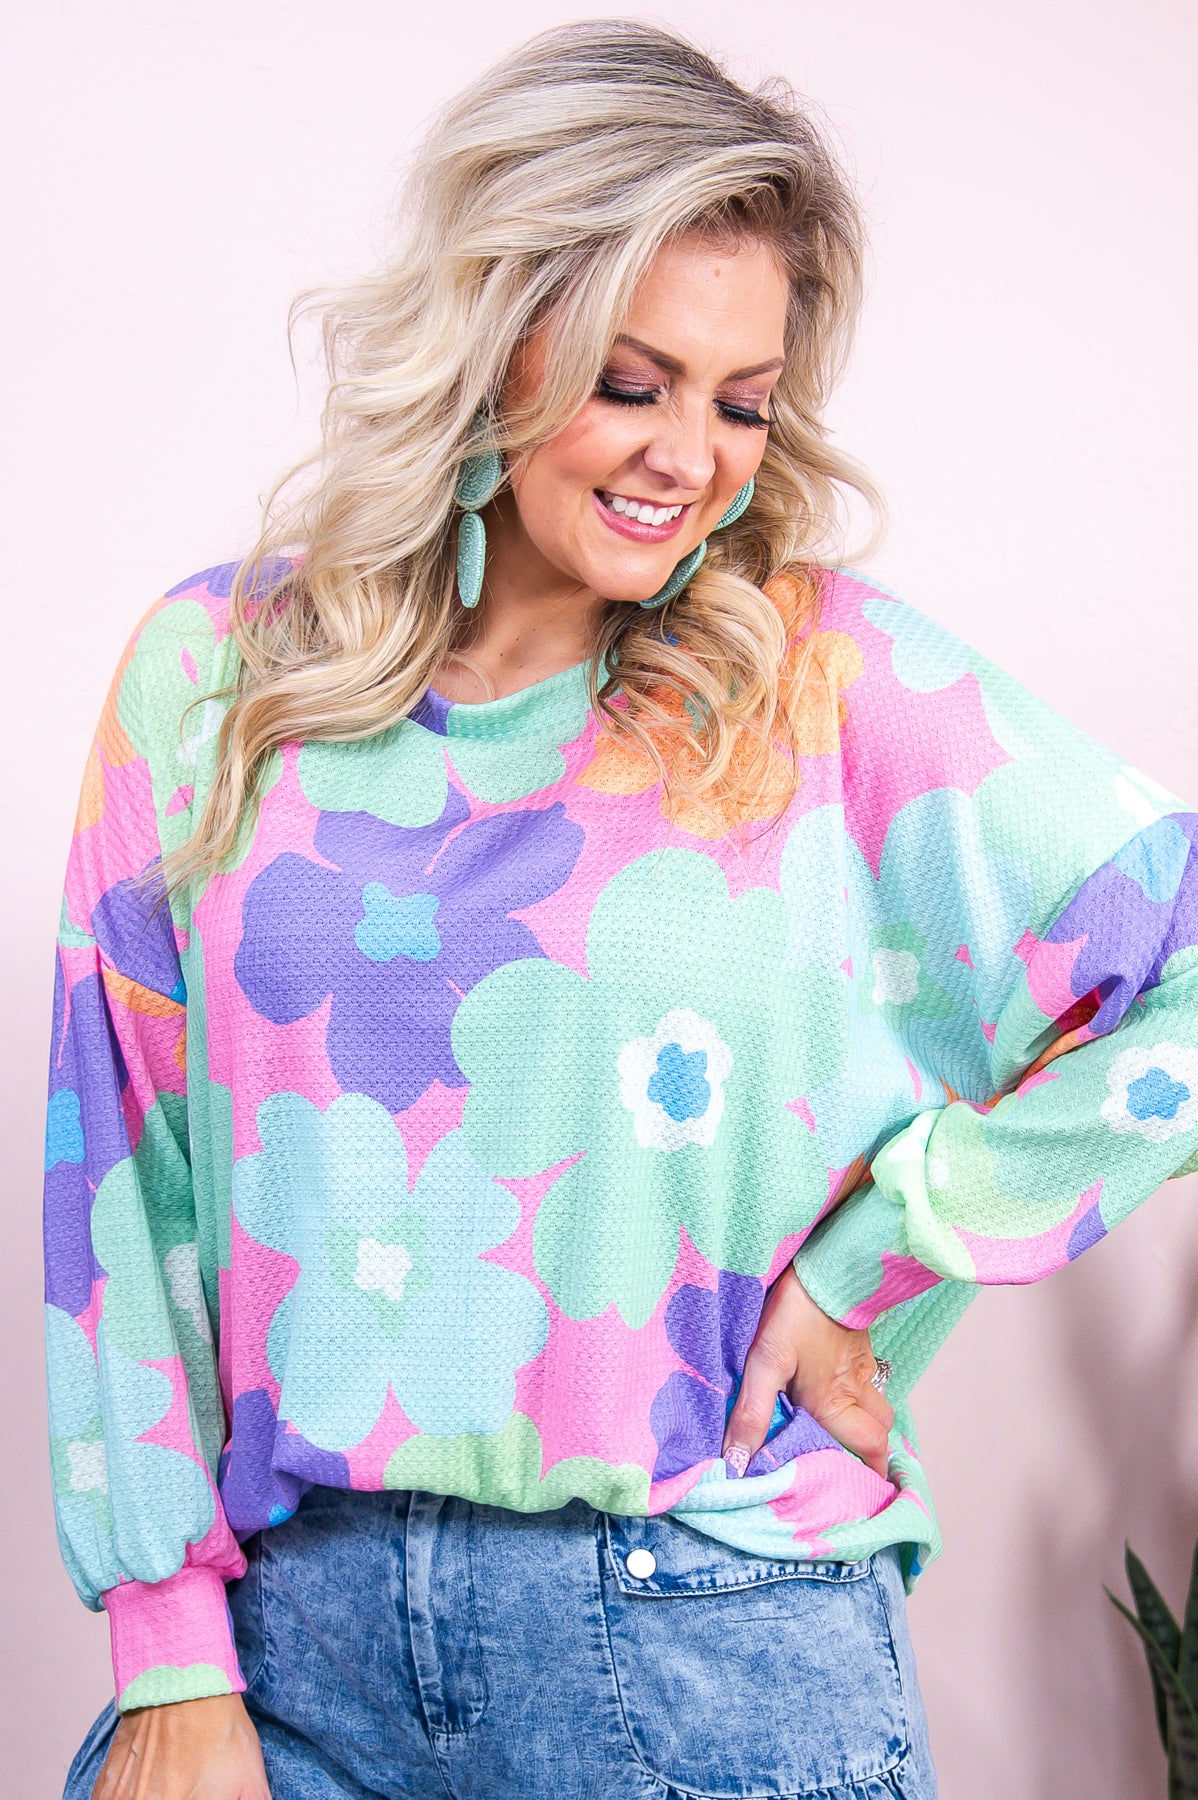 The Warmth Of Love Pink/Multi Color Floral Top - T8983PK